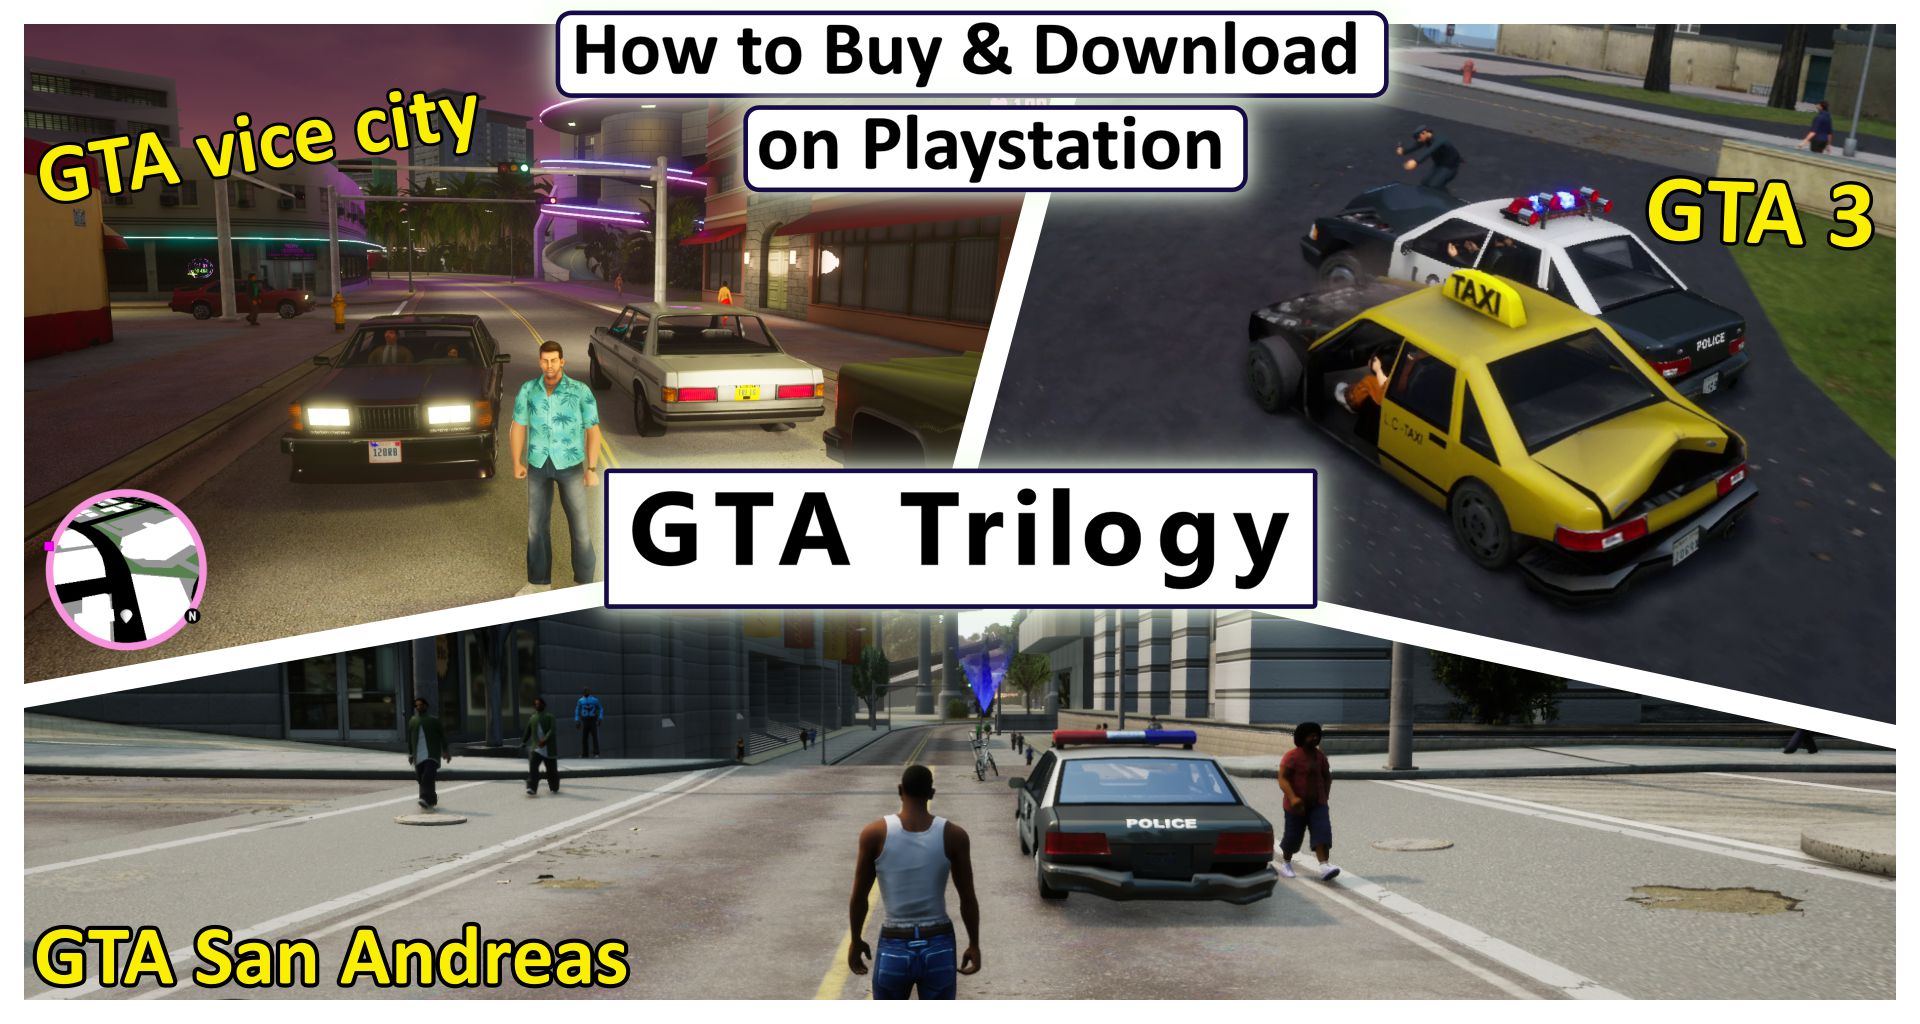 How to Buy & download GTA Trilogy Definitive Edition on PlayStation